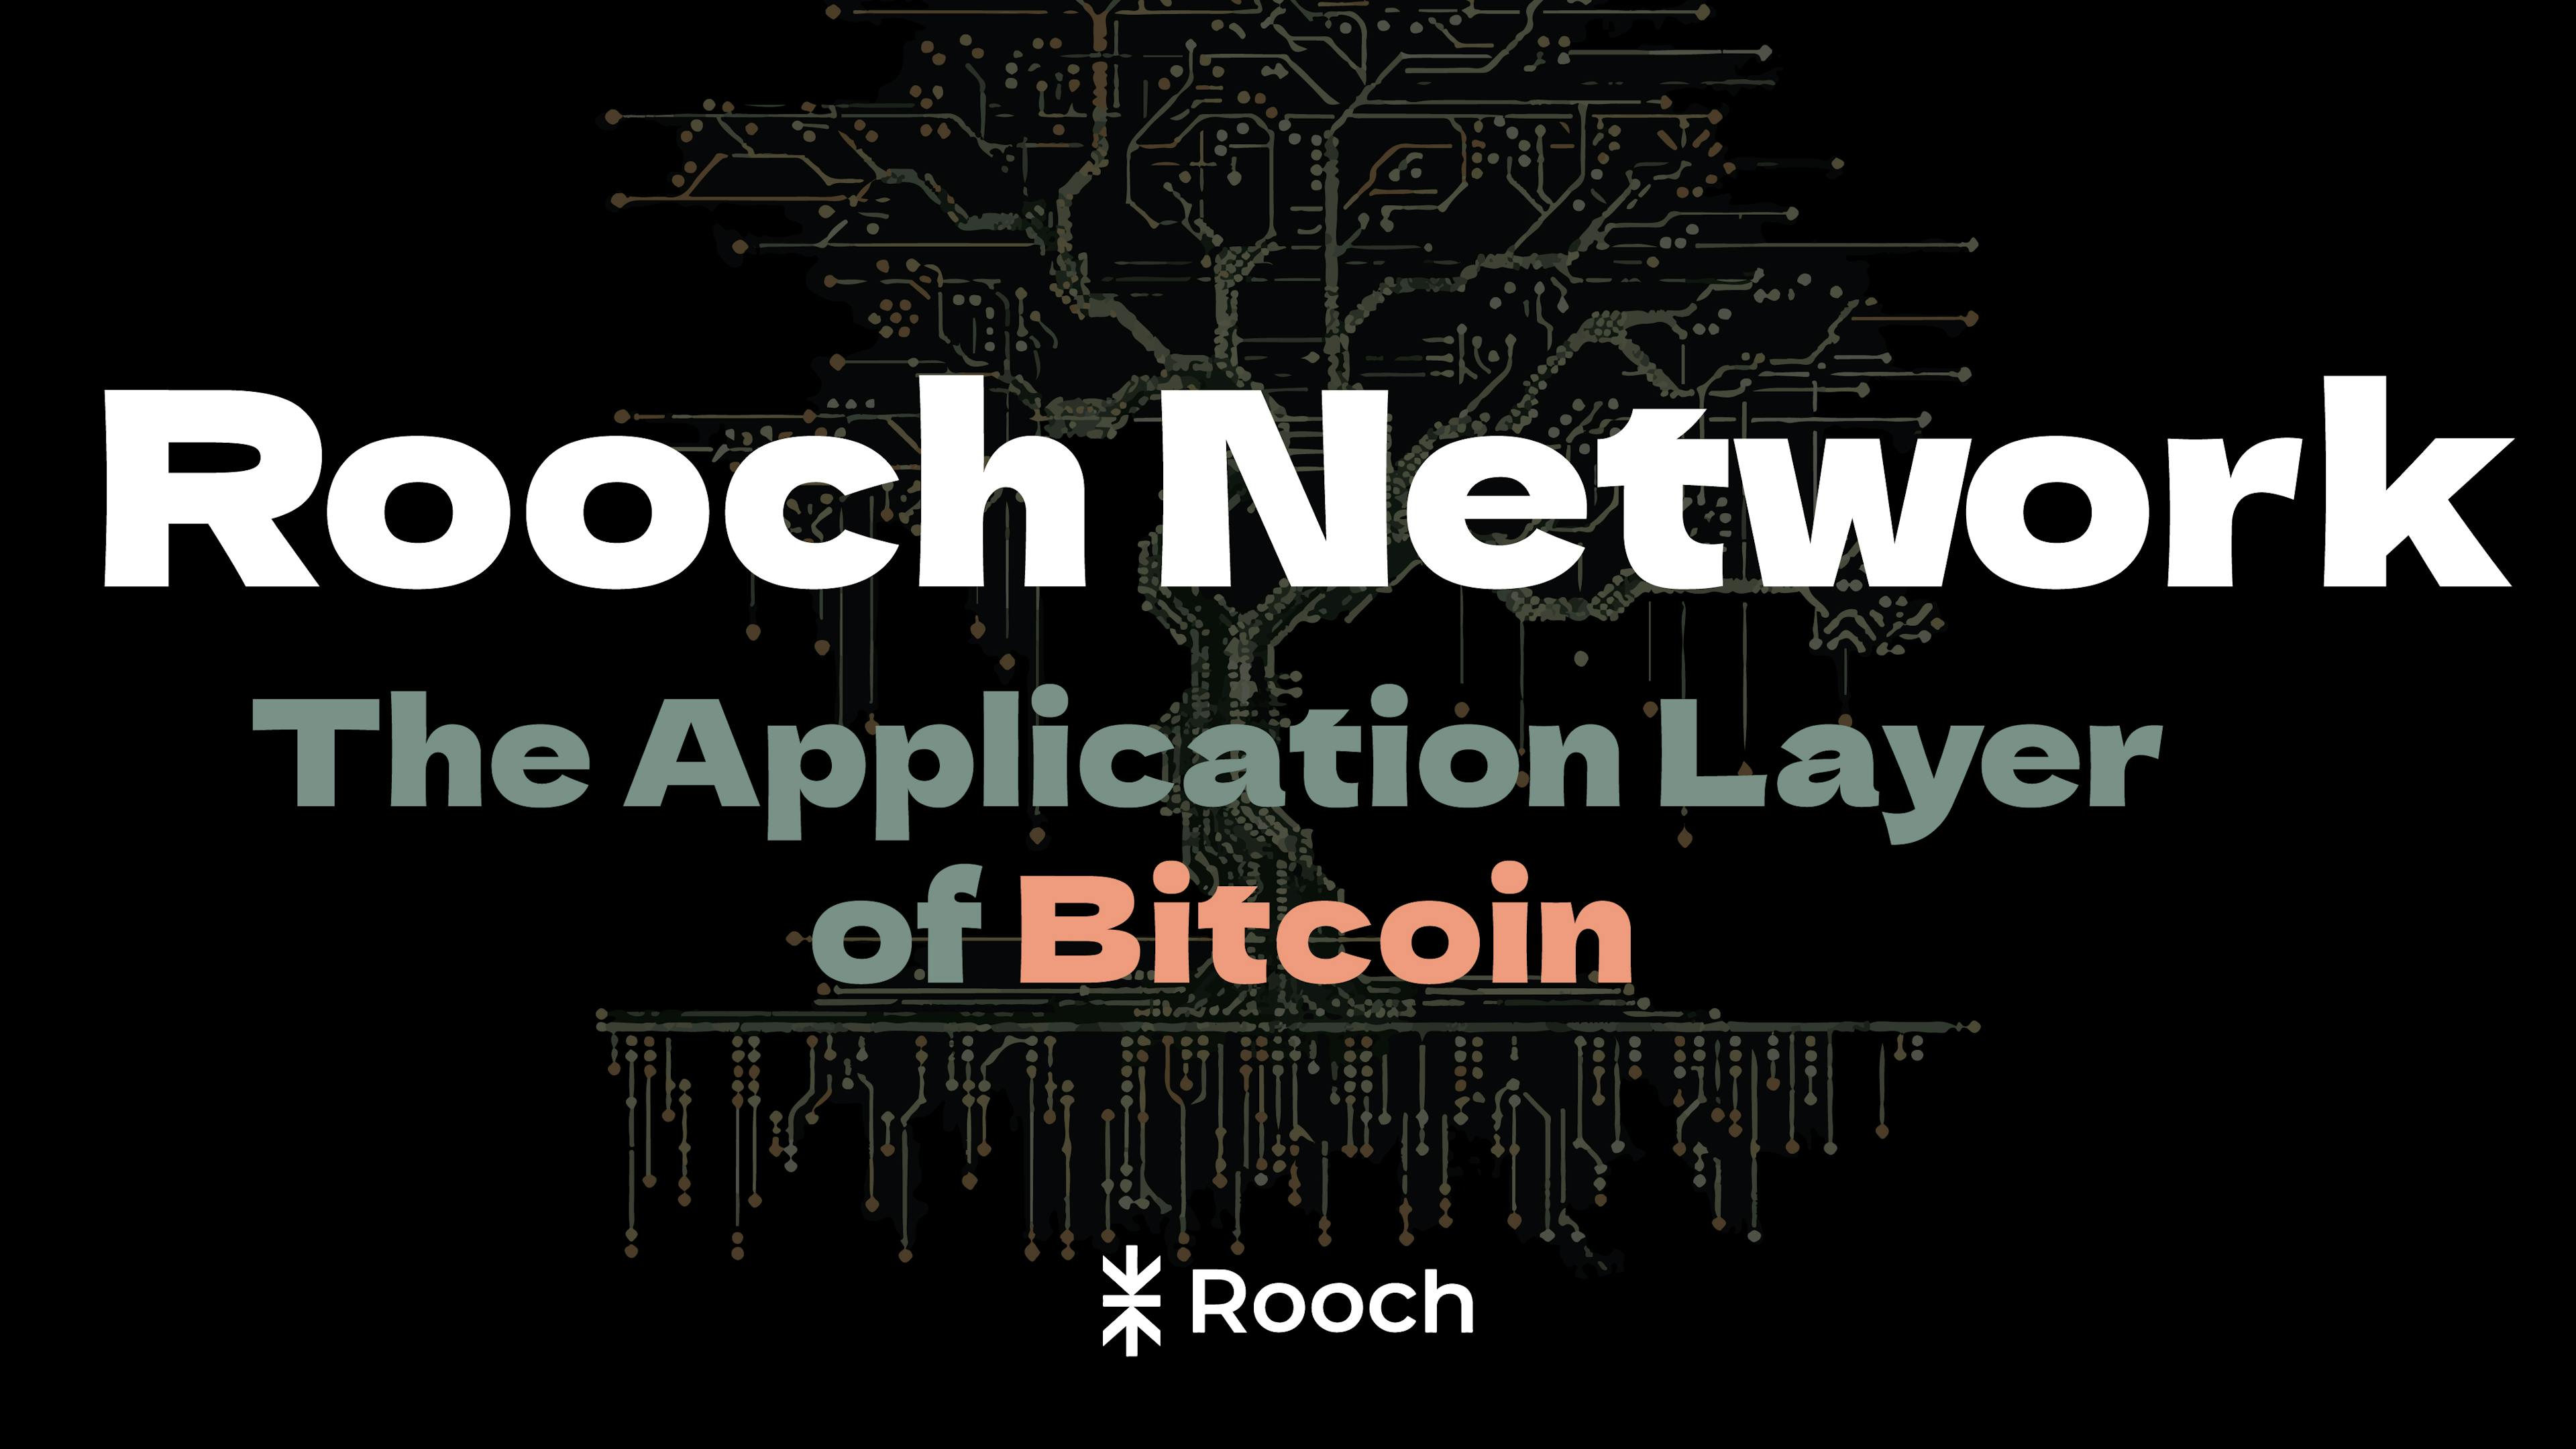 The Application Layer of Bitcoin